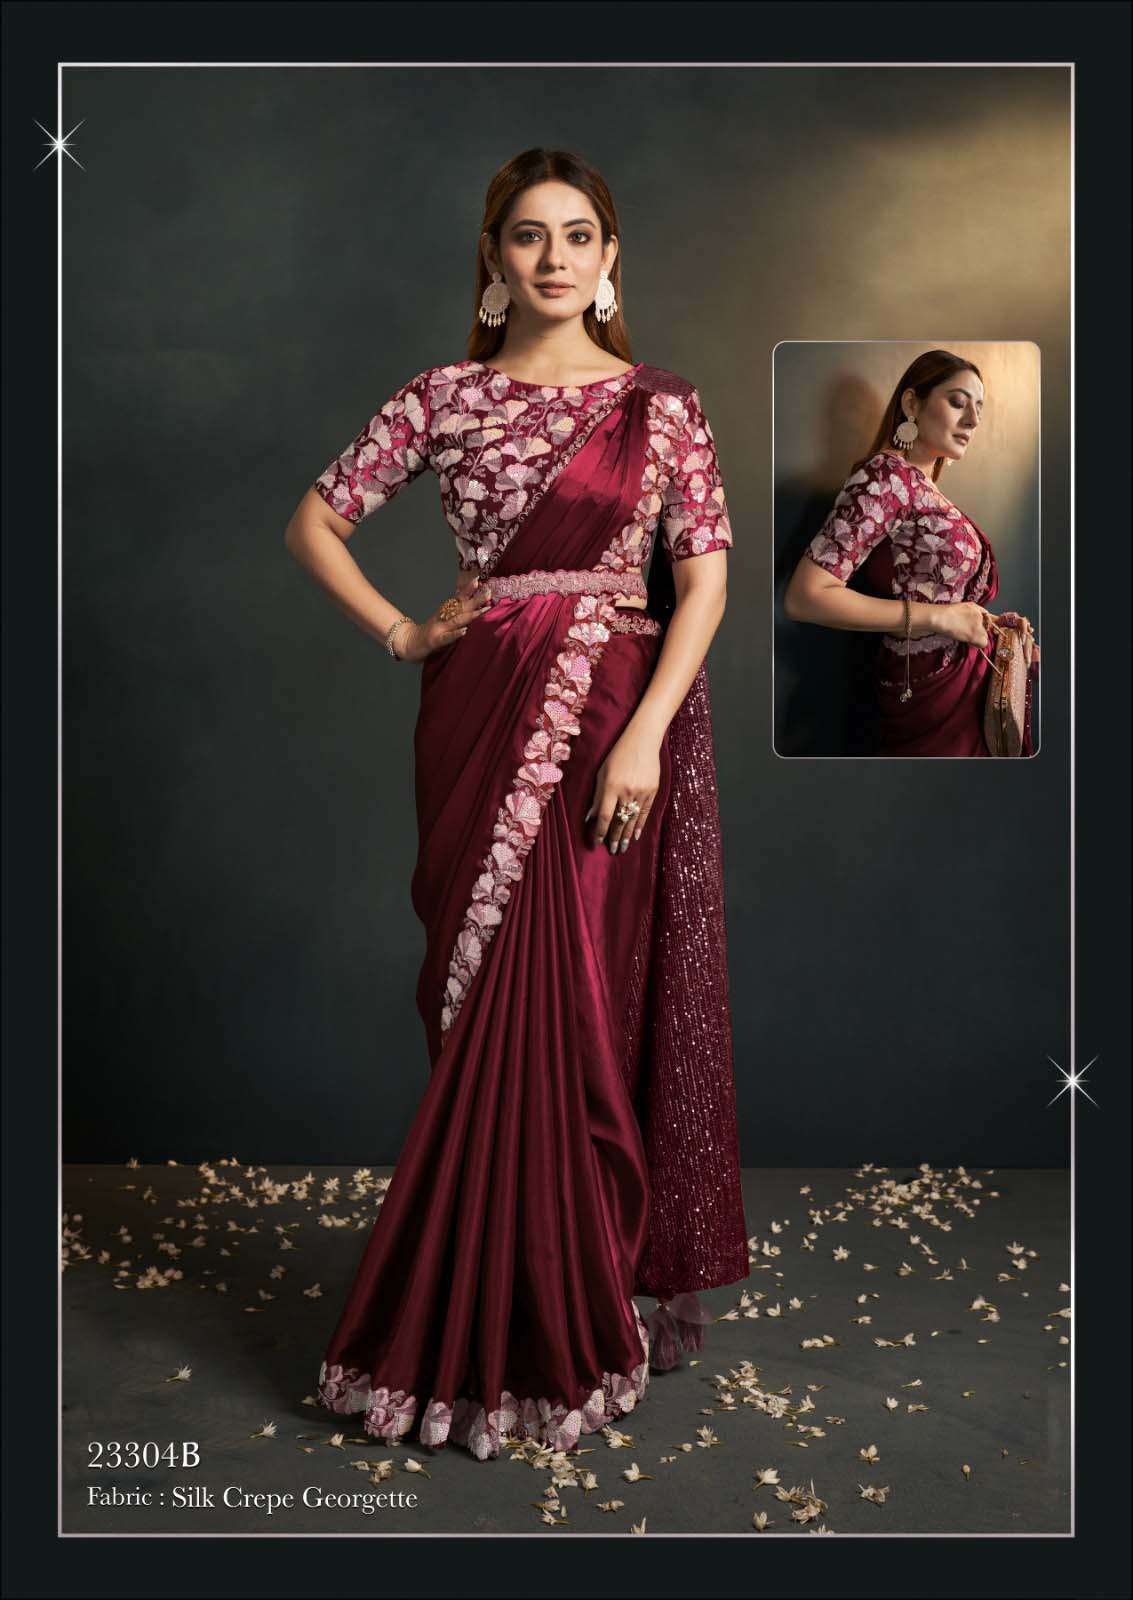 mahotsav present Moh Manthan new 23300 Series features gorgeous ready to wear fancy sarees in dazzling colors